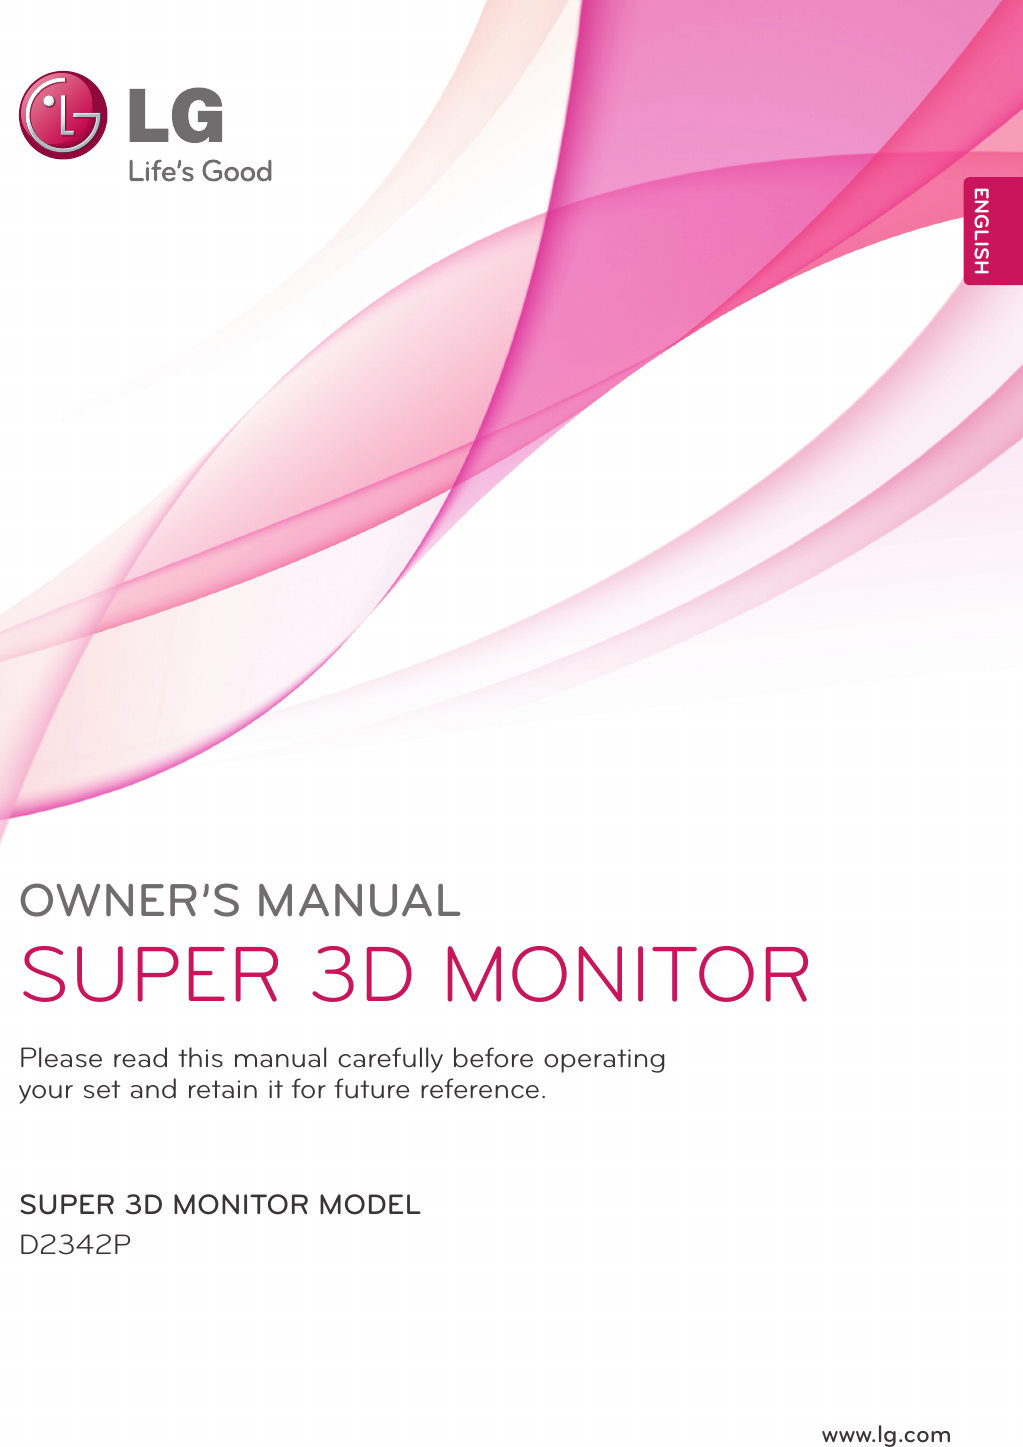 www.lg.comOWNER’S MANUALSUPER 3D MONITORD2342PPlease read this manual carefully before operating your set and retain it for future reference.SUPER 3D MONITOR MODELENGLISH